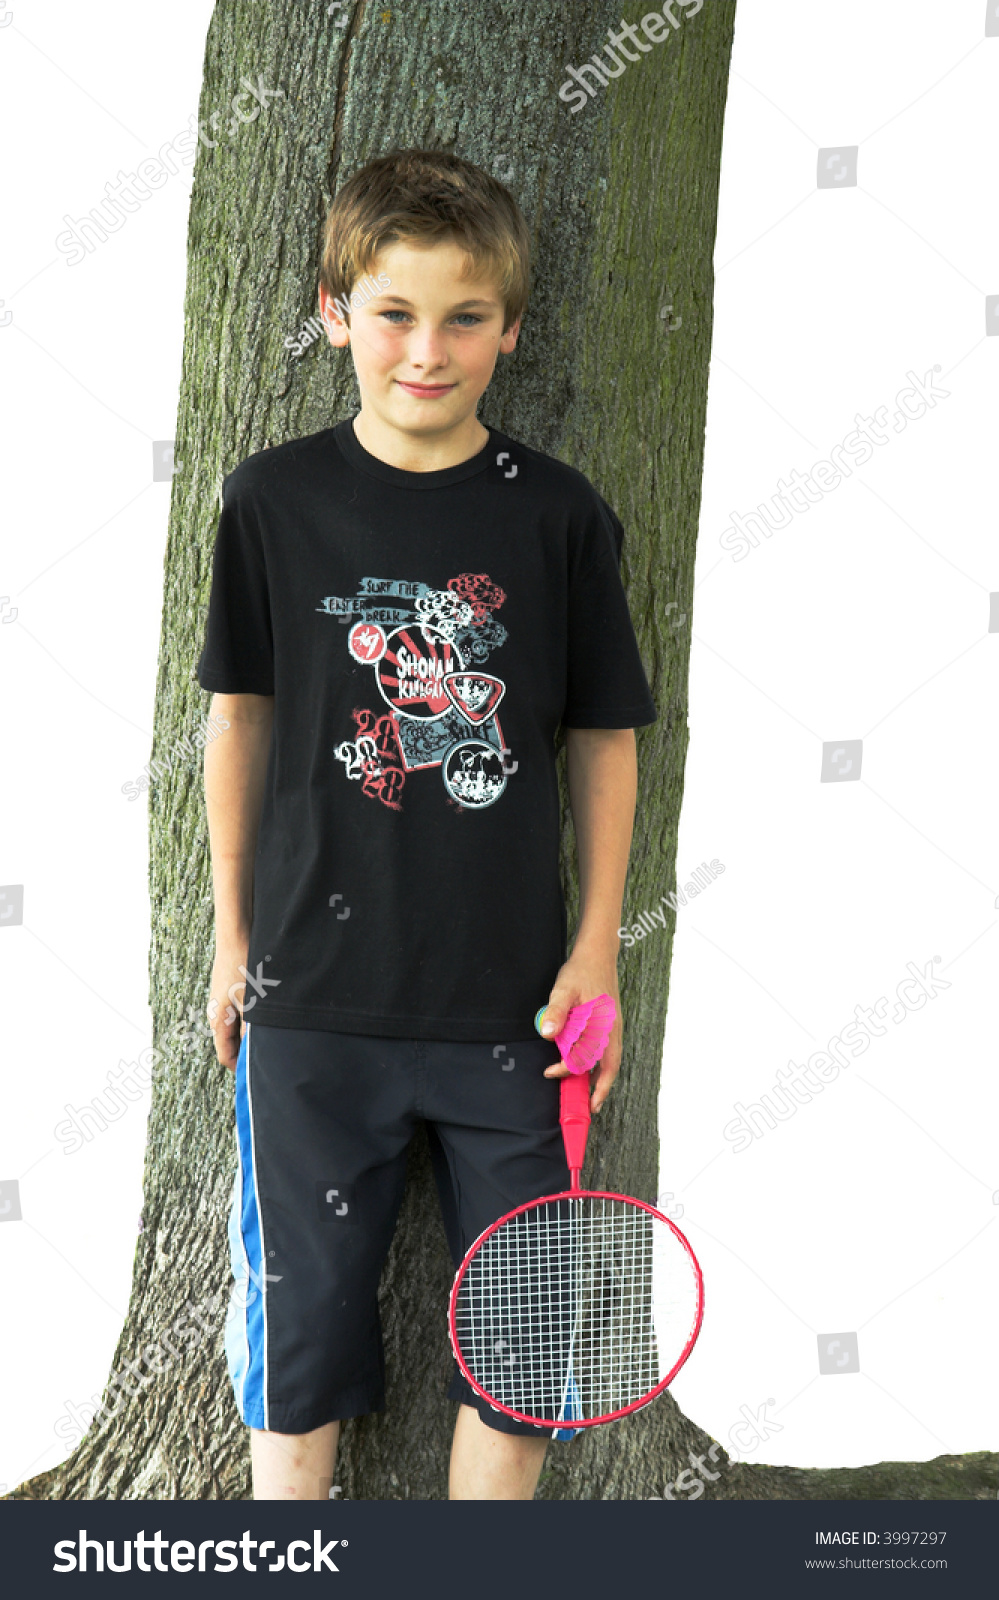 stock-photo-boy-with-racquet-and-shuttle-cock-standing-against-tree-3997297.jpg